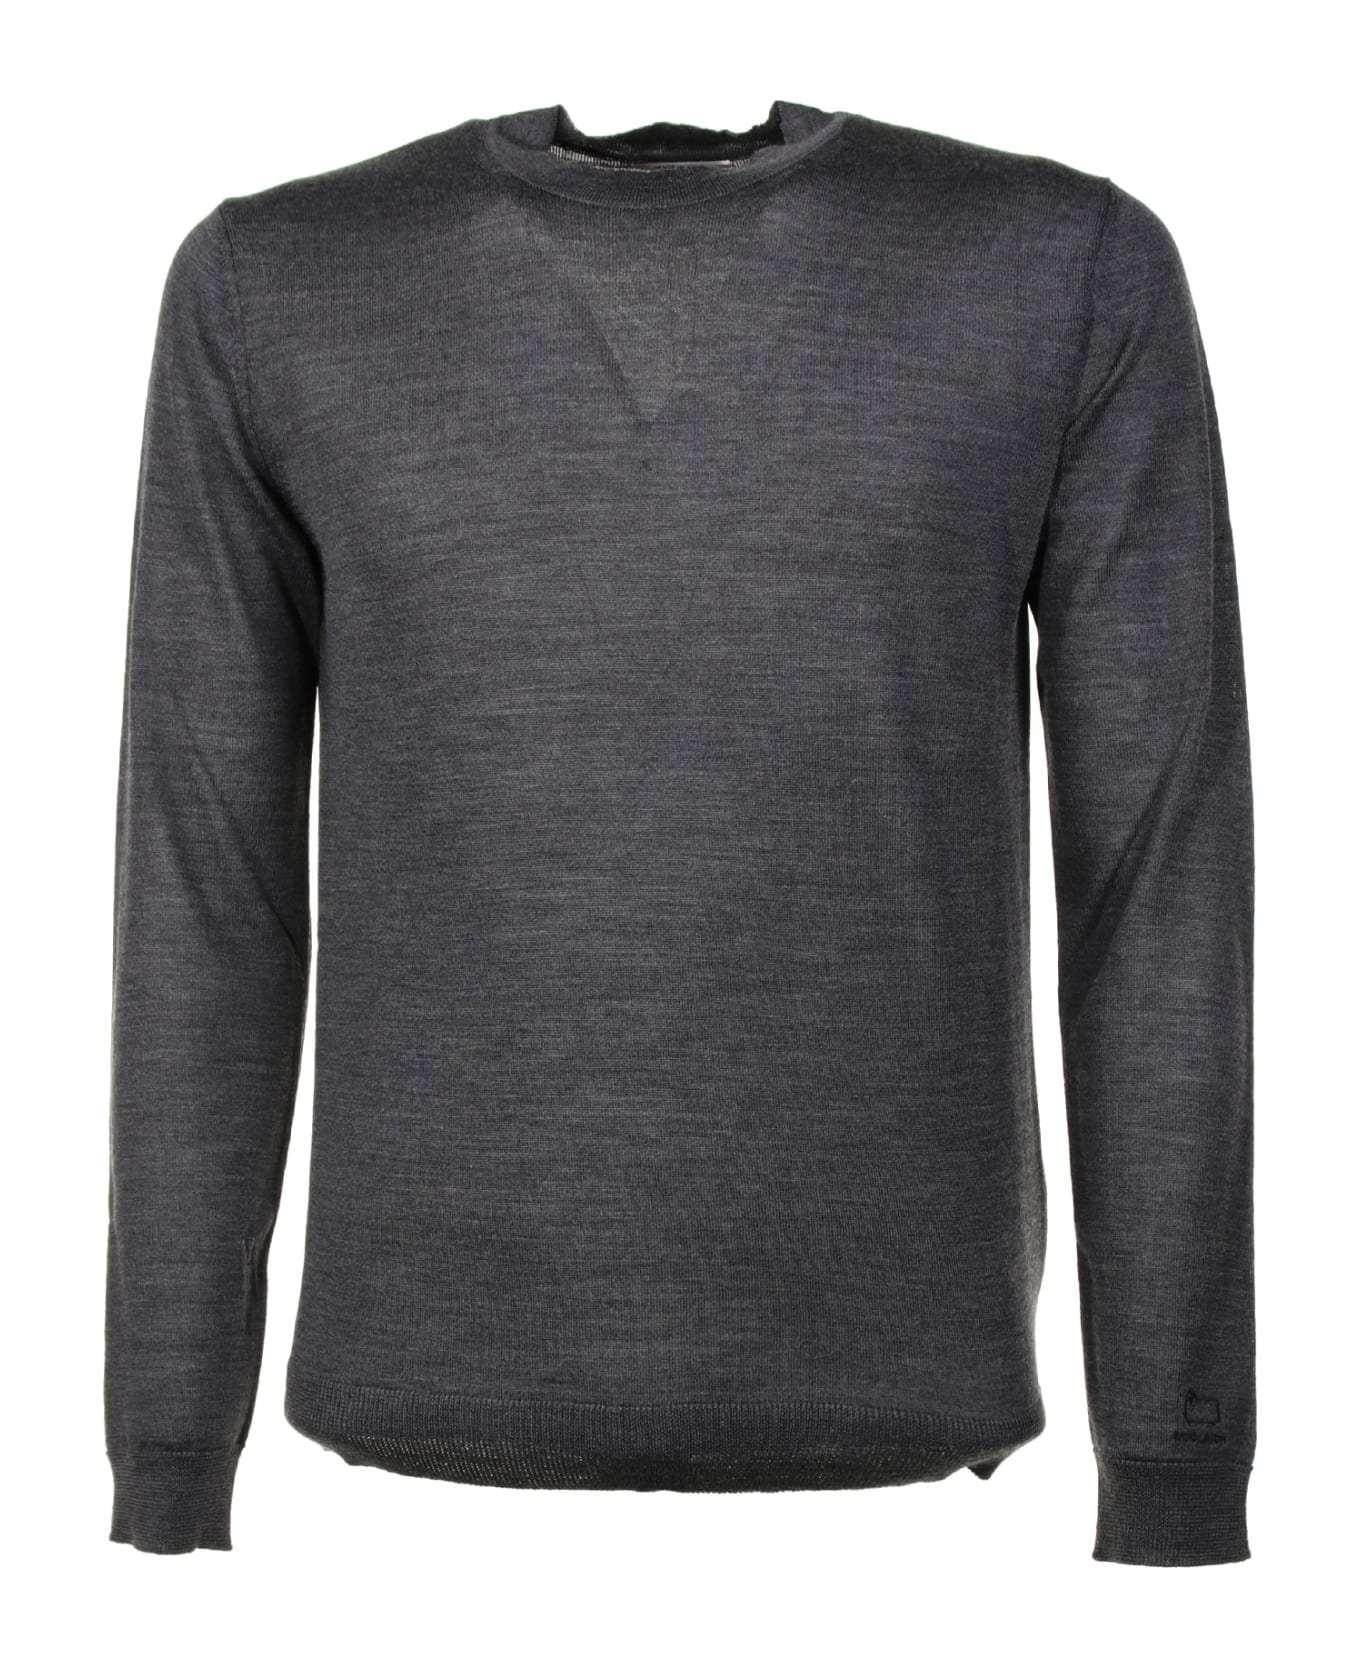 Woolrich Crewneck Sweater - CHARCOAL